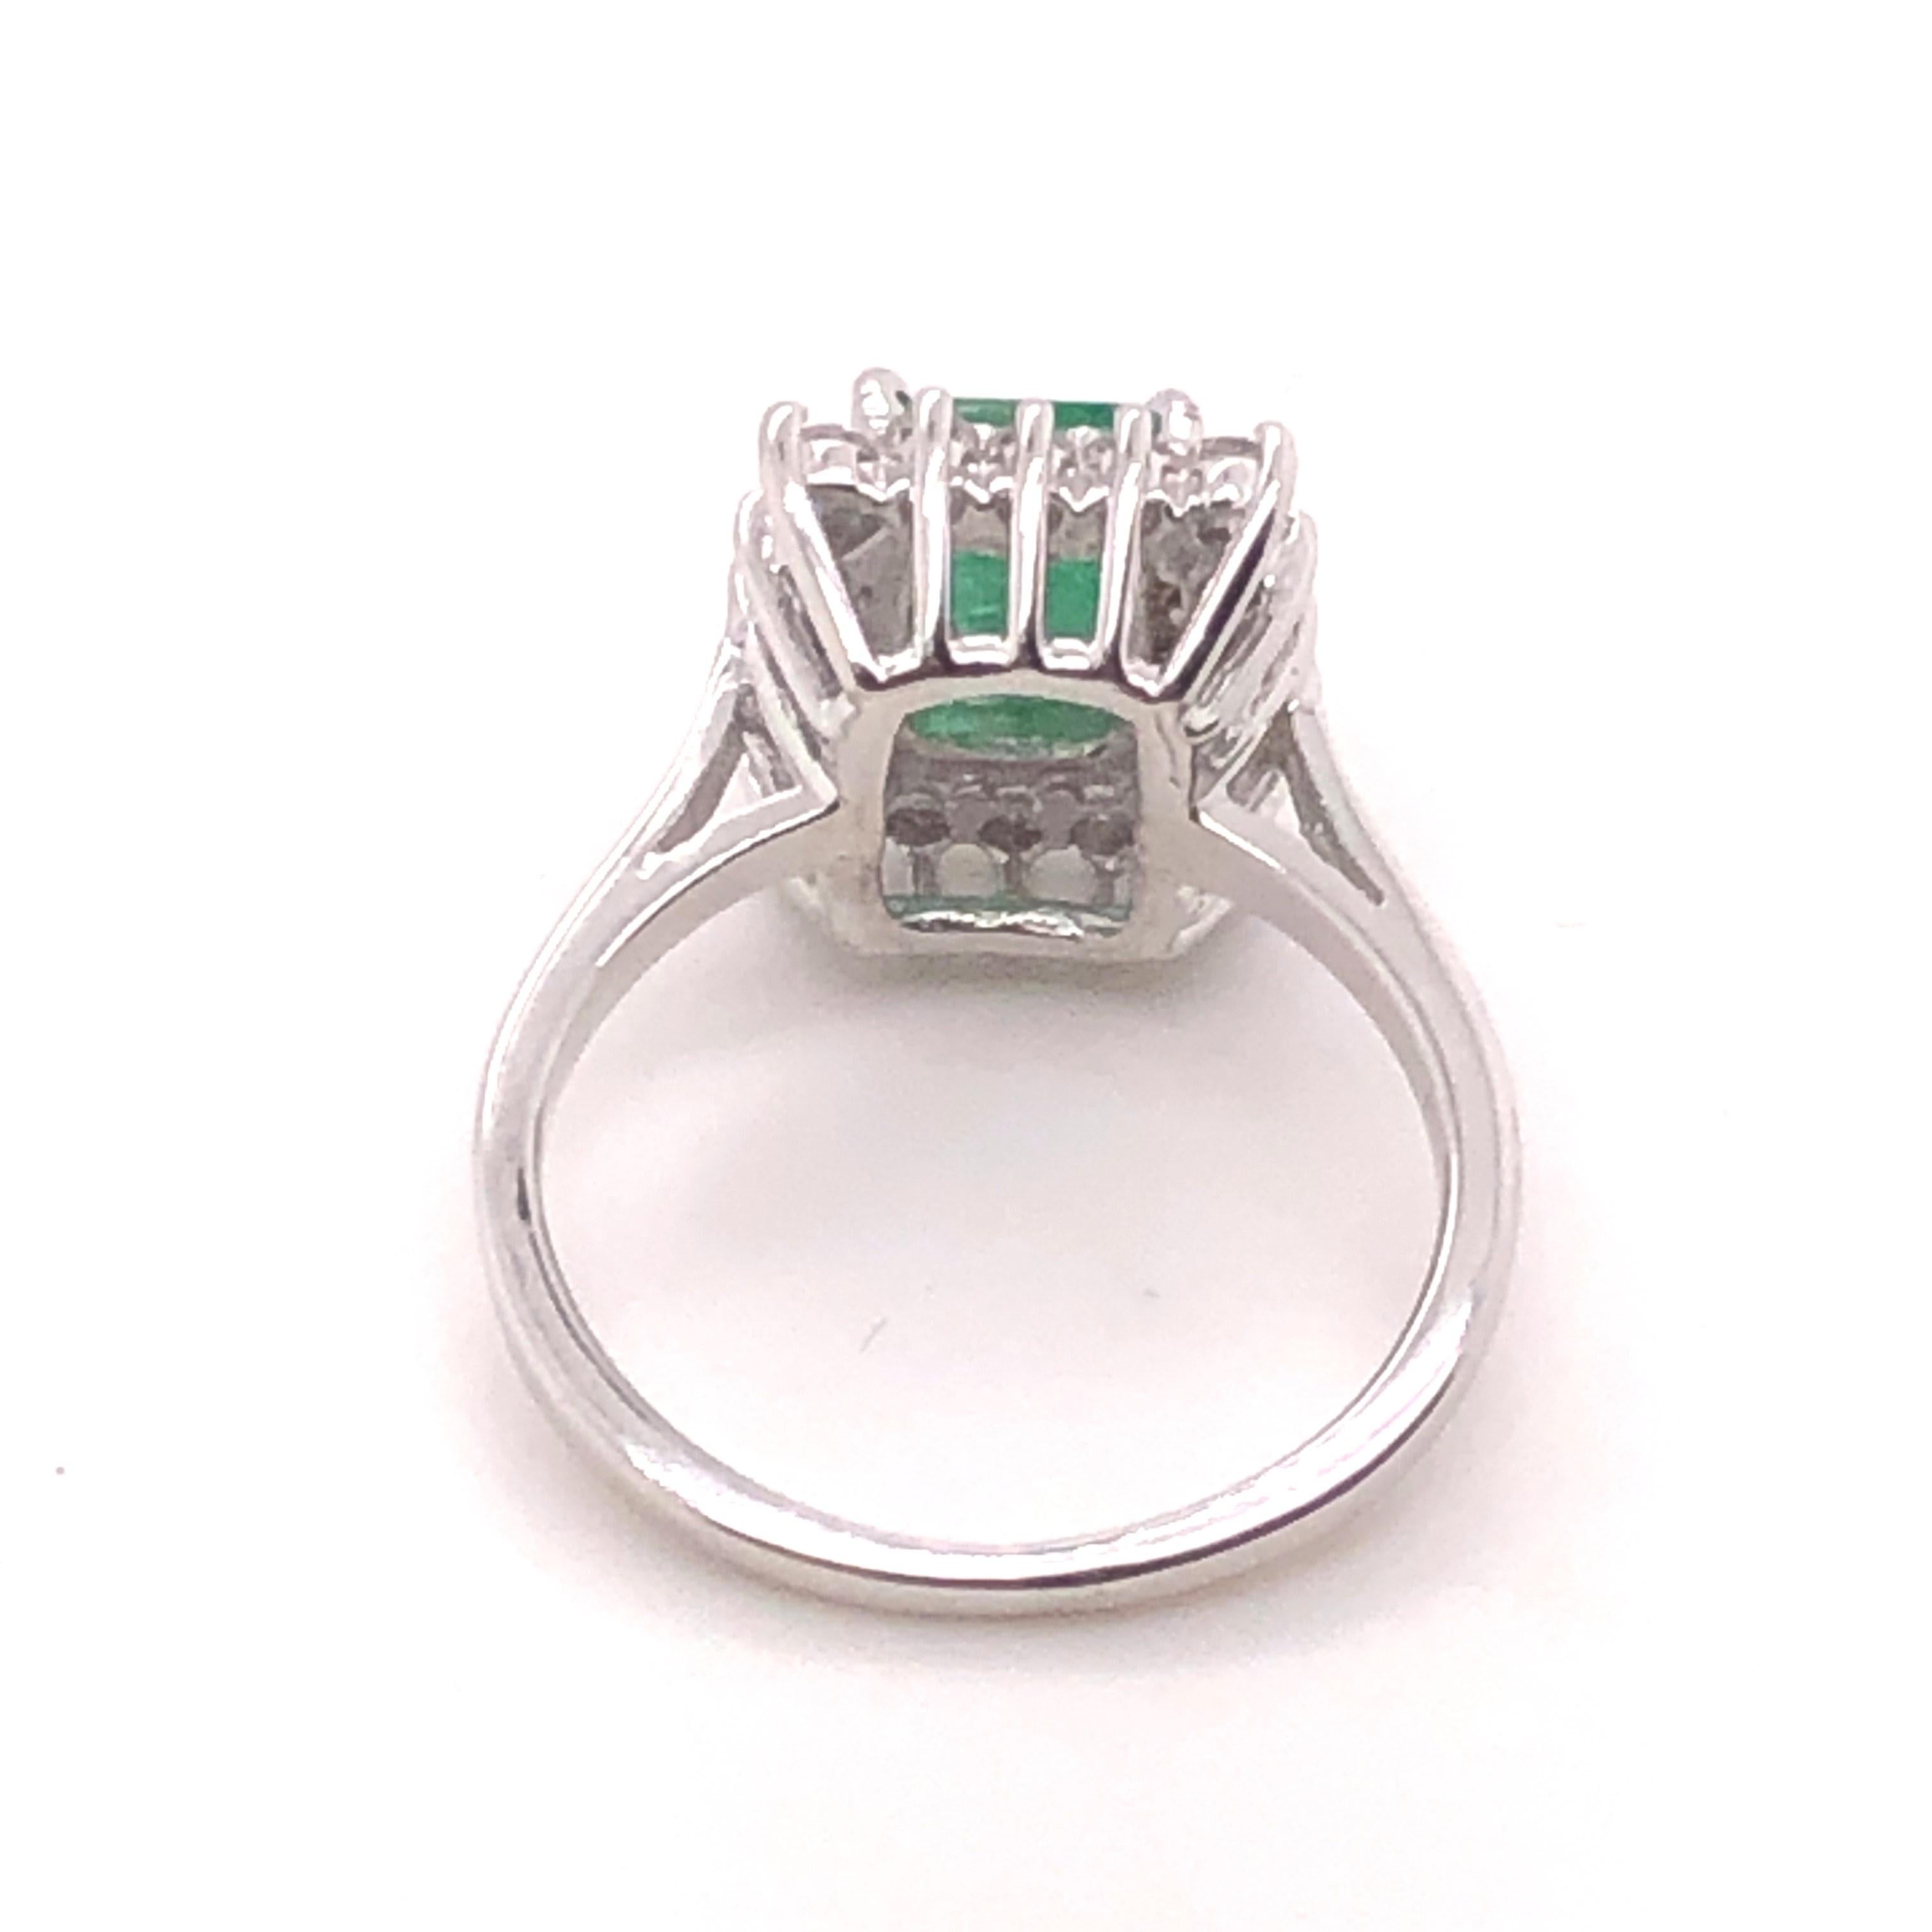 Women's or Men's 14kt Emerald Cut Emerald Ring with Diamond Halo